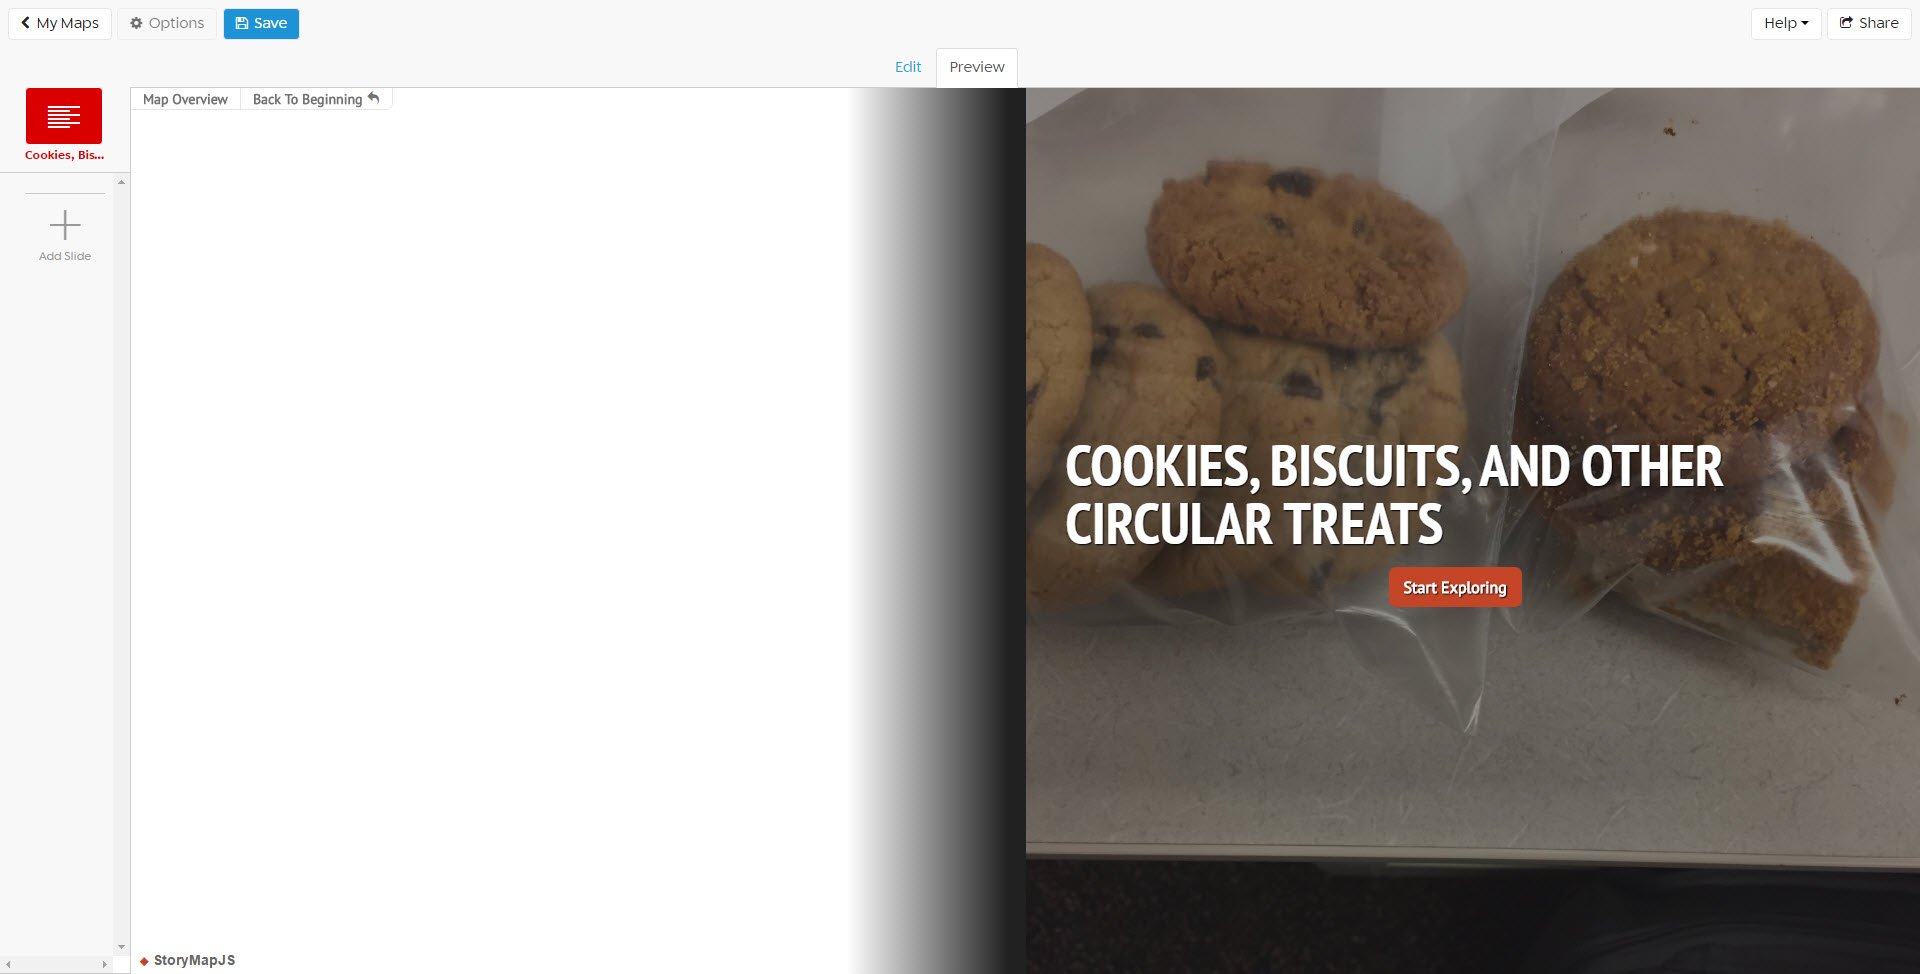 cookies in a plastic bag as background image of title page